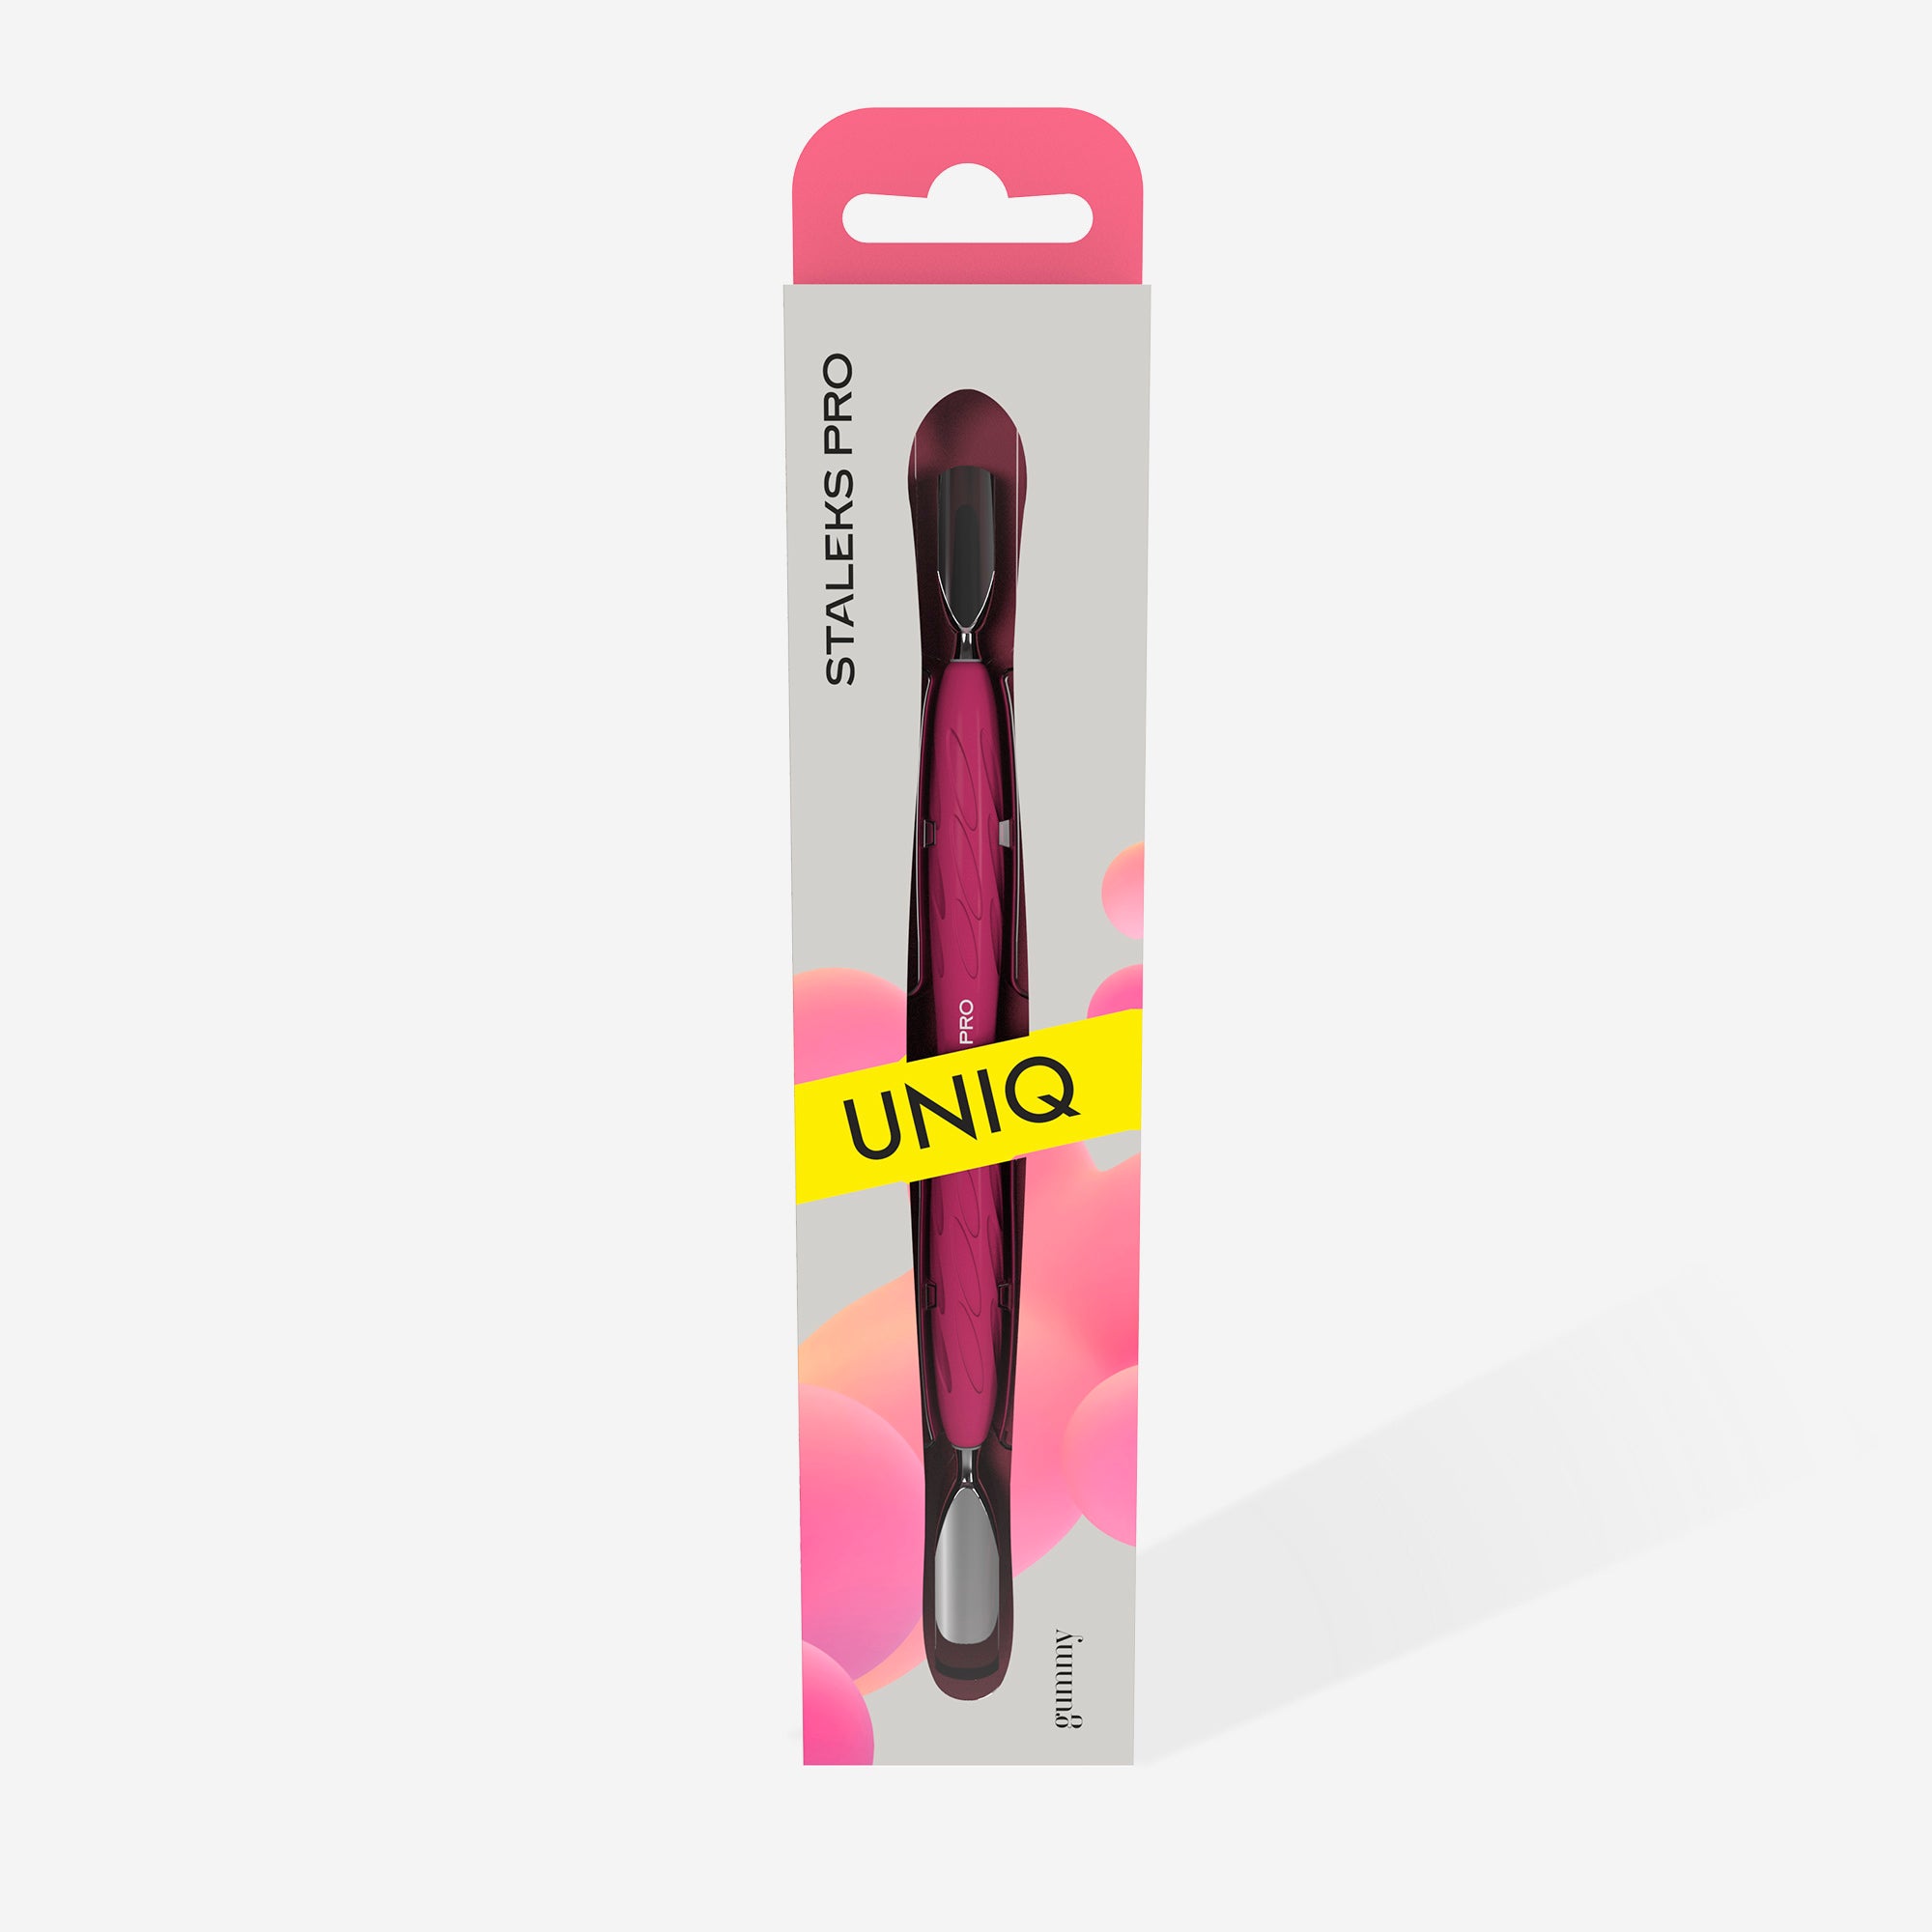 Manicure pusher with silicone handle "Gummy" UNIQ 10 TYPE 1 (wide rounded pusher + narrow rounded pusher)